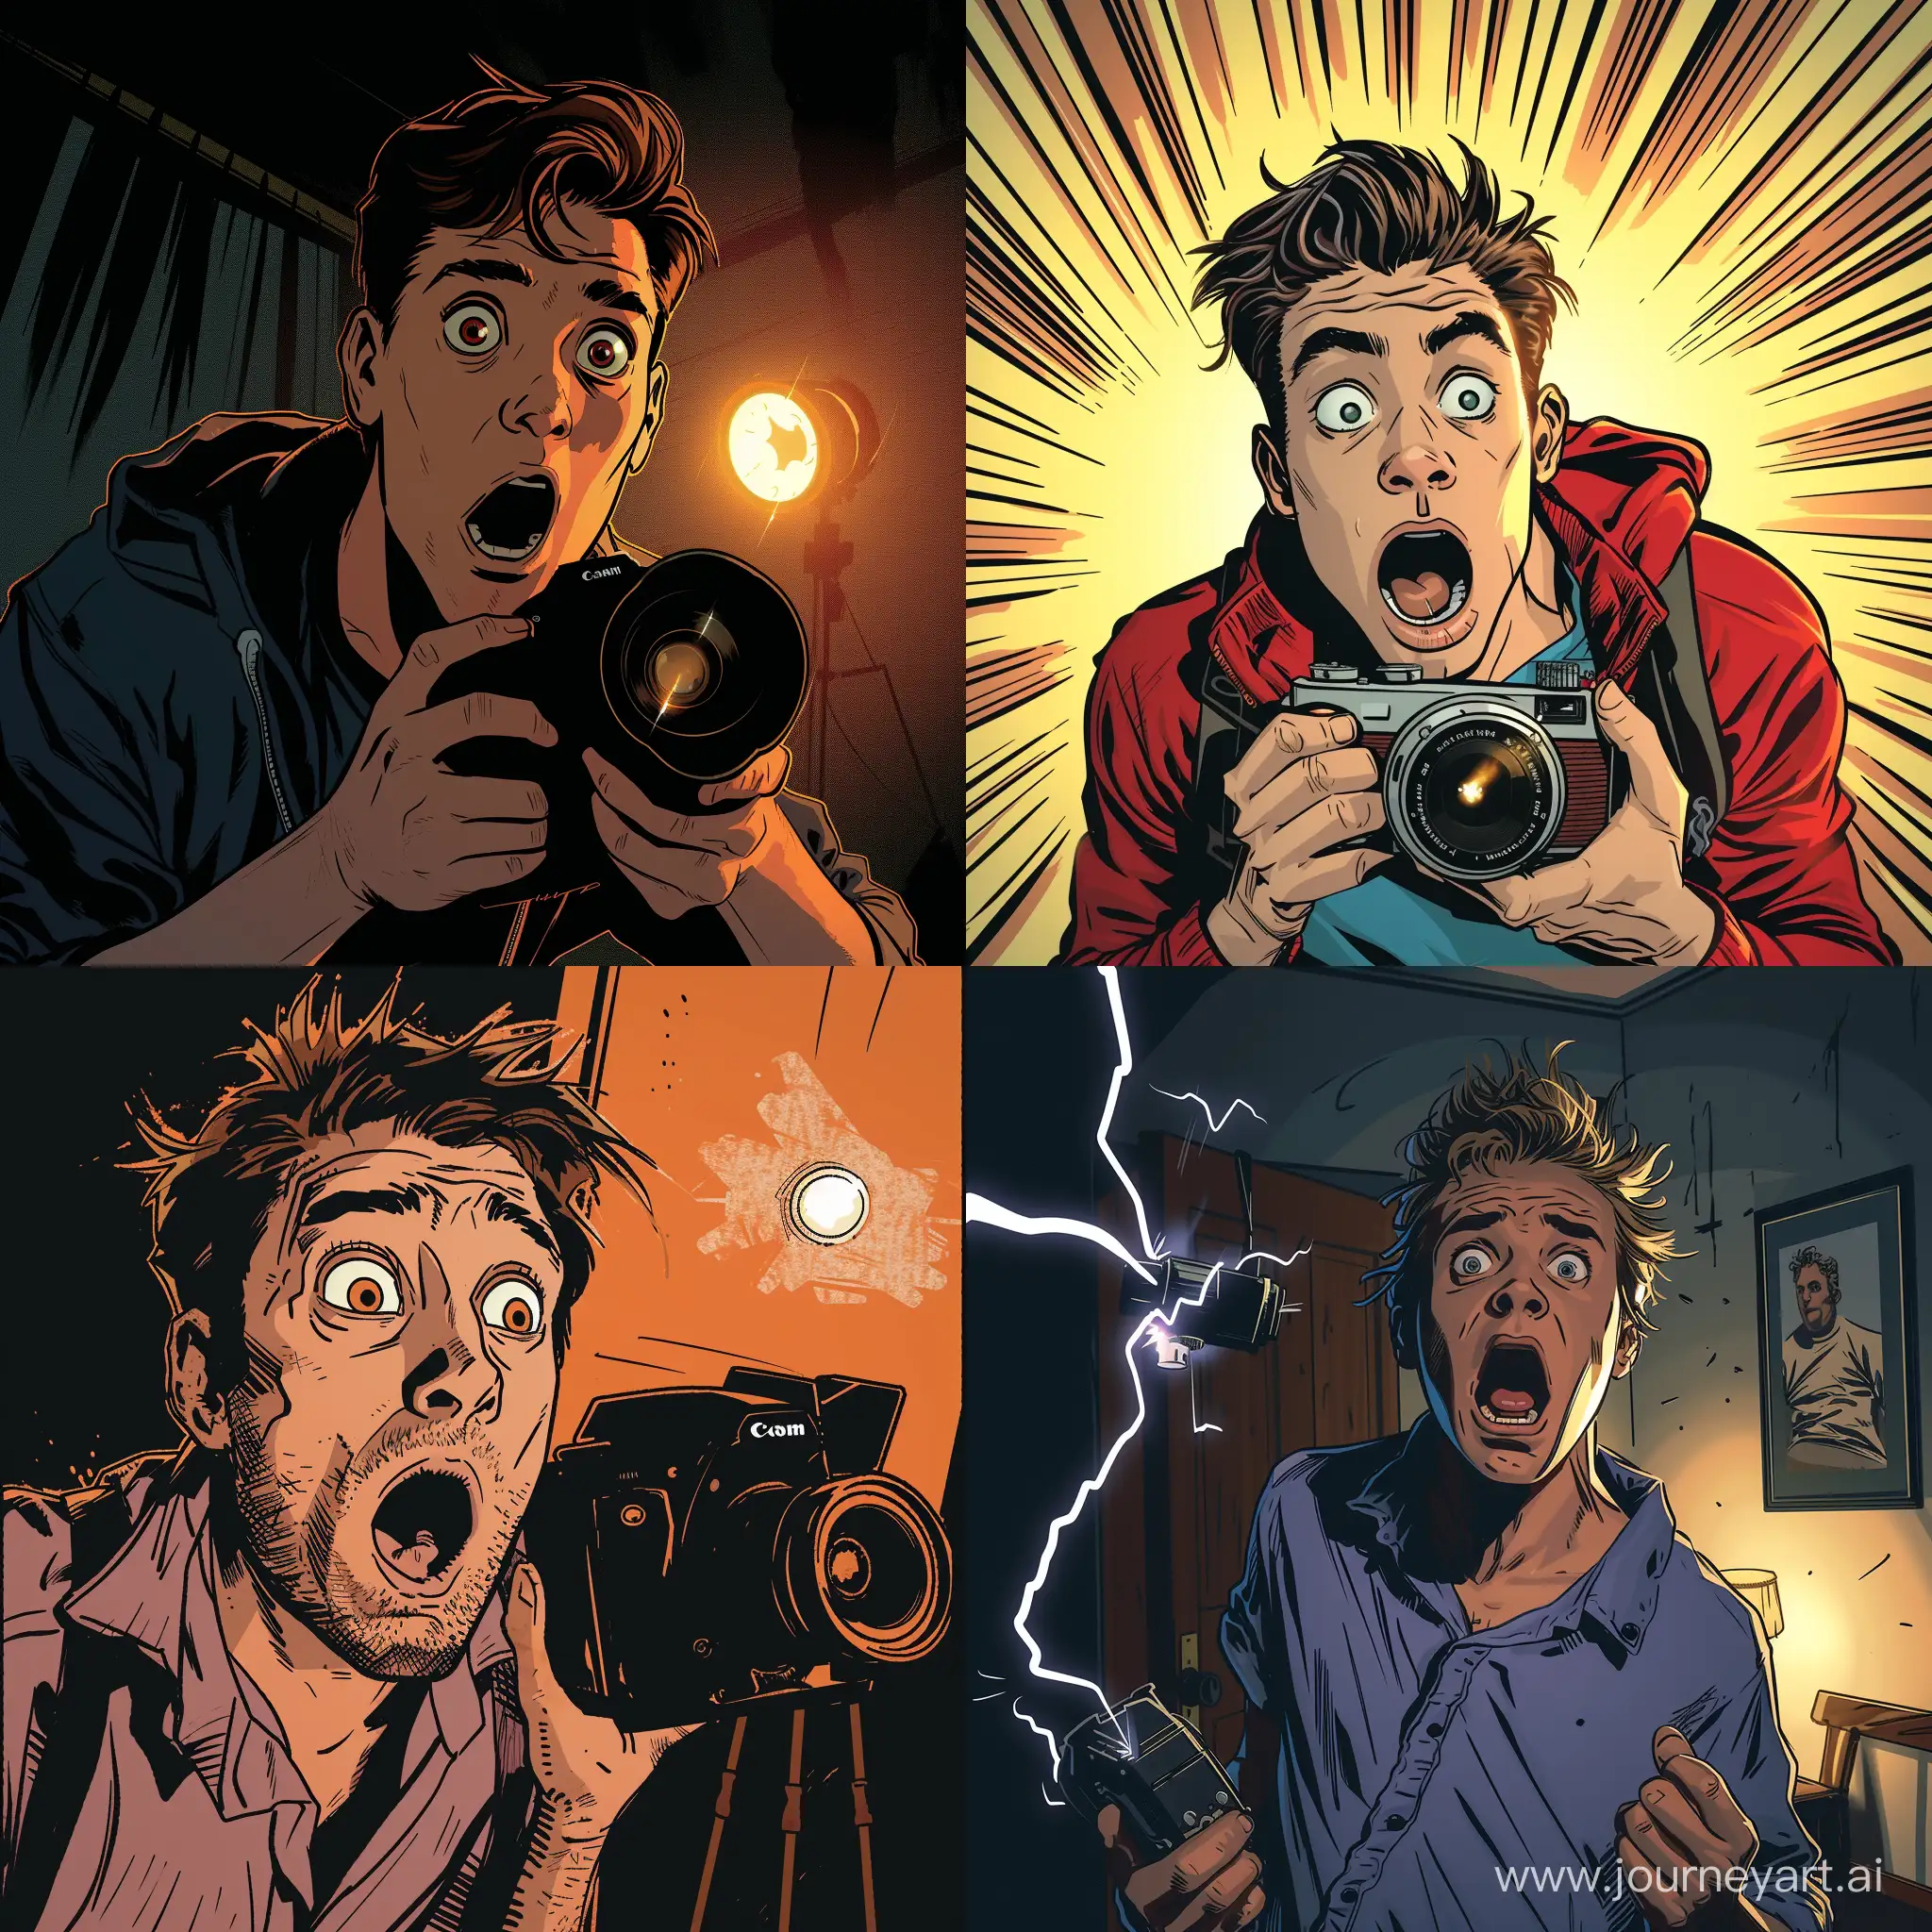 Man-Reacts-in-Shock-to-Camera-with-Minimal-Lighting-Modern-American-Comic-Book-Style